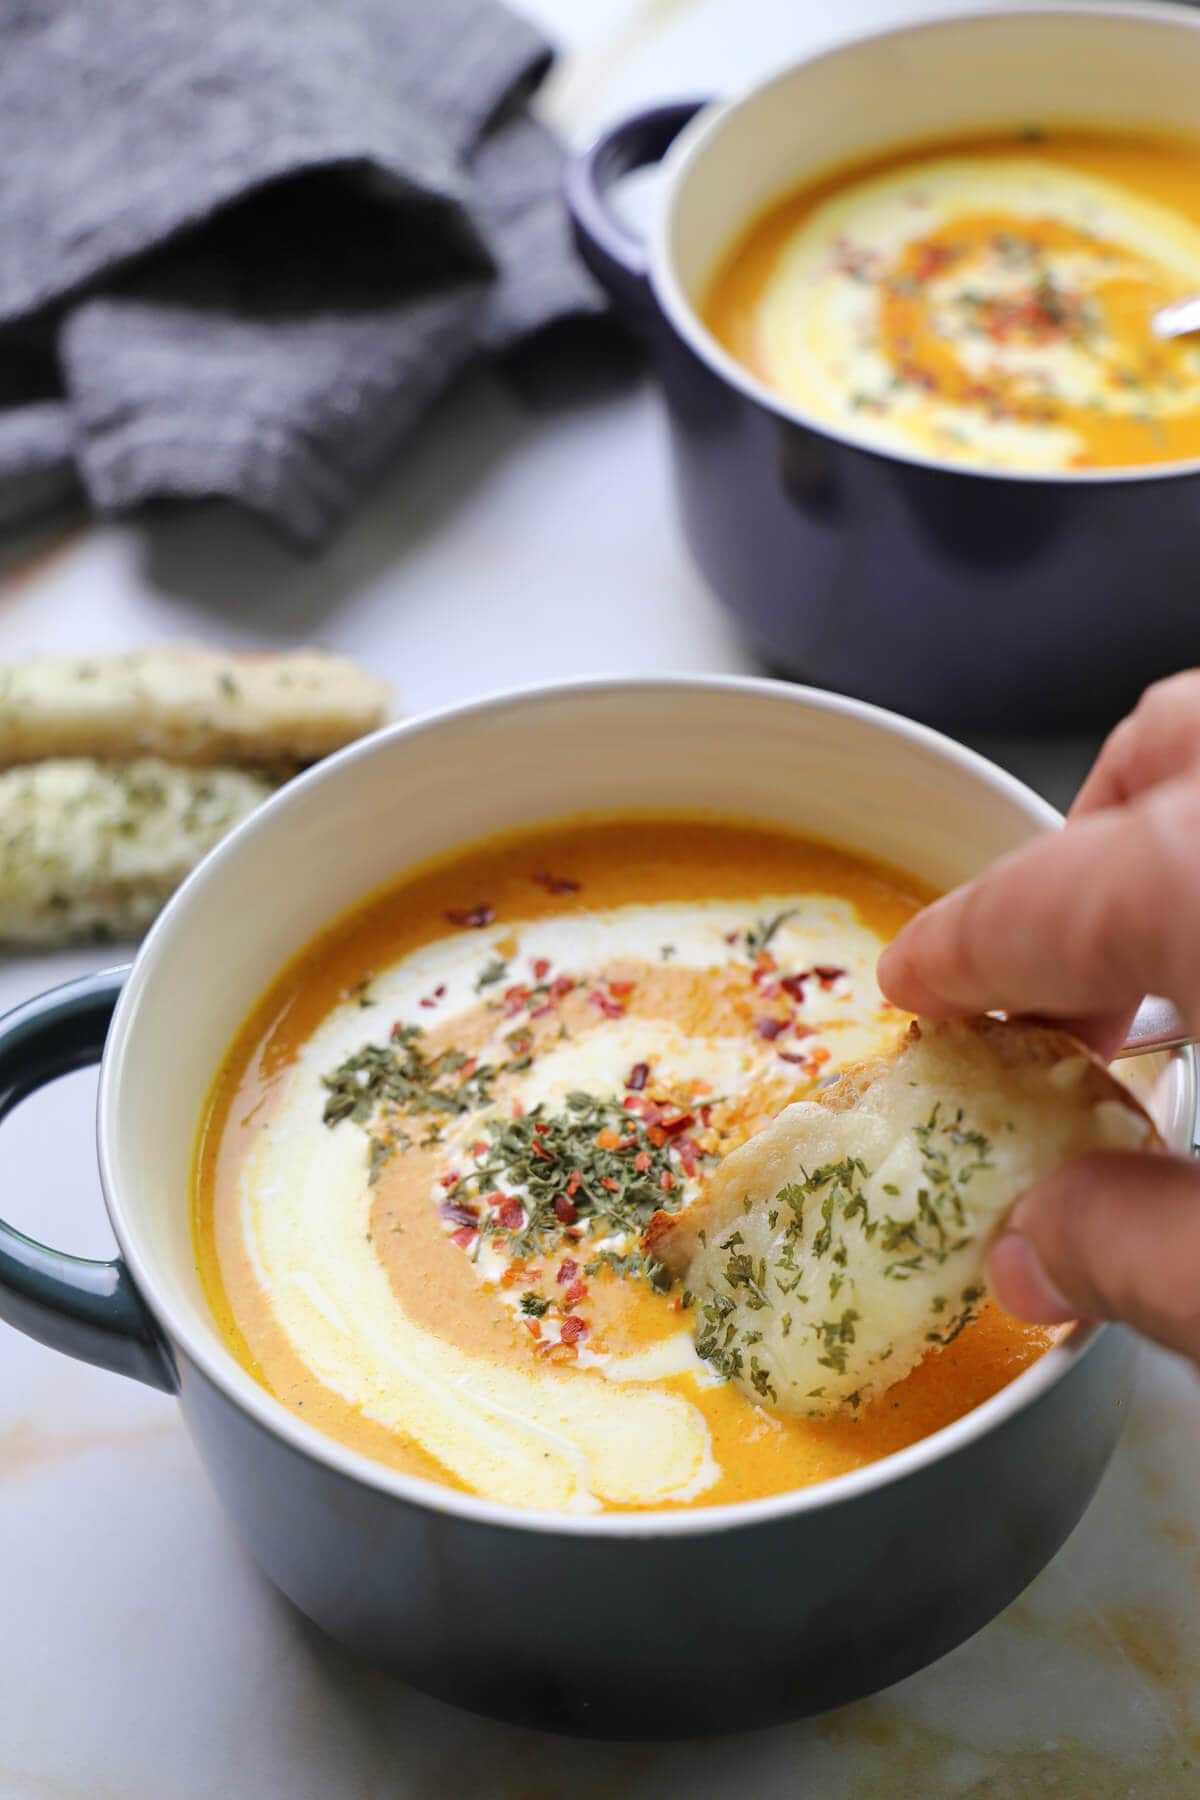 A hand dipping a piece of garlic bread into a bowl of carrot soup.